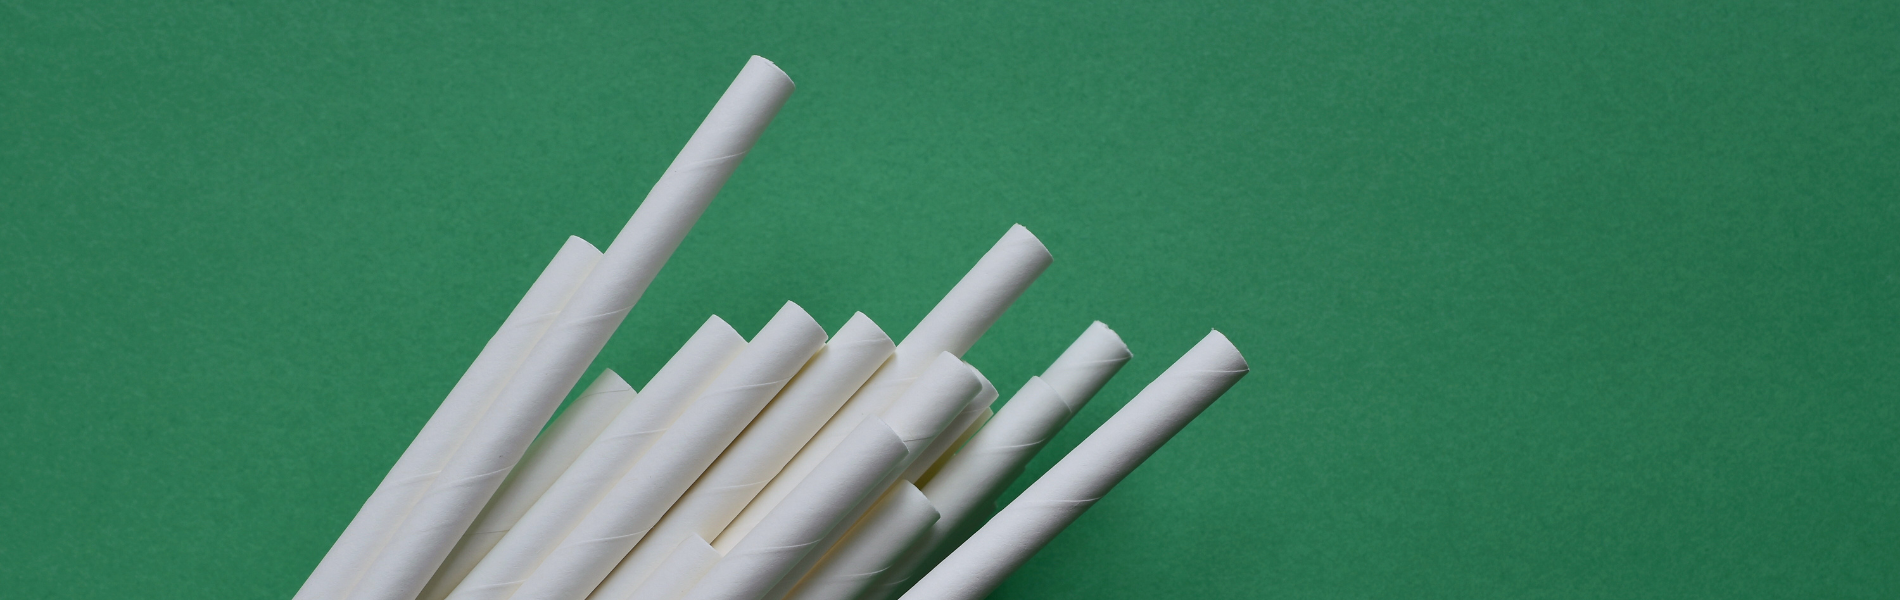 Are paper straws recyclable?